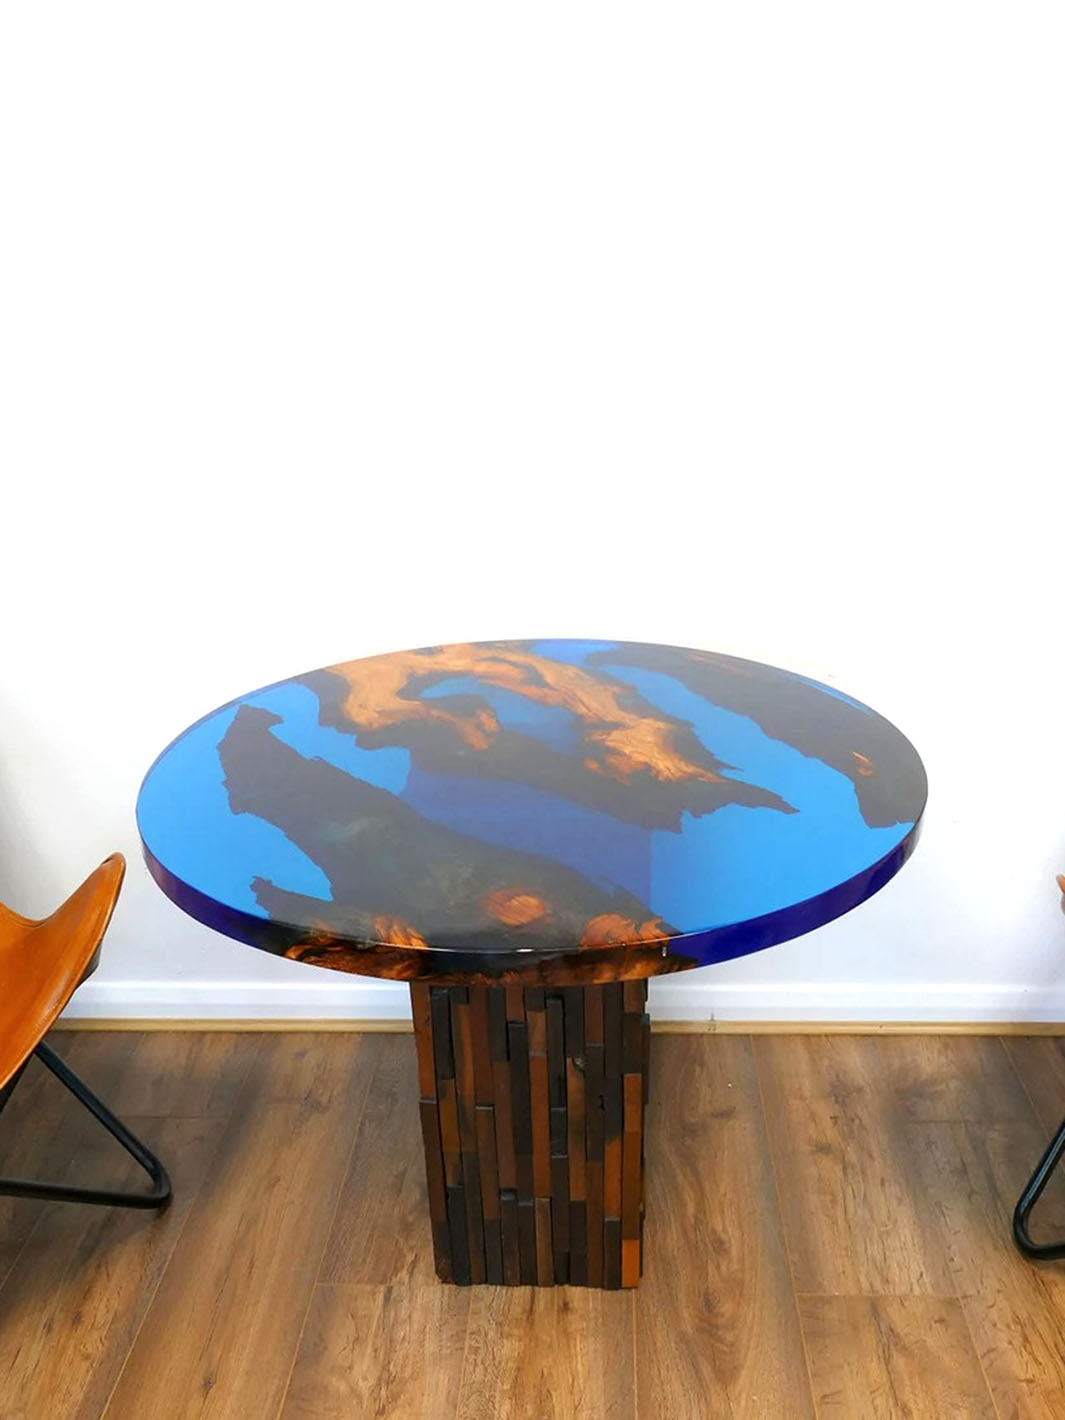 Luxurious Circular Handcrafted River Beach Epoxy Resin Wooden Dining Table | 80cm Made 4 Decor Tables MDR0017-4